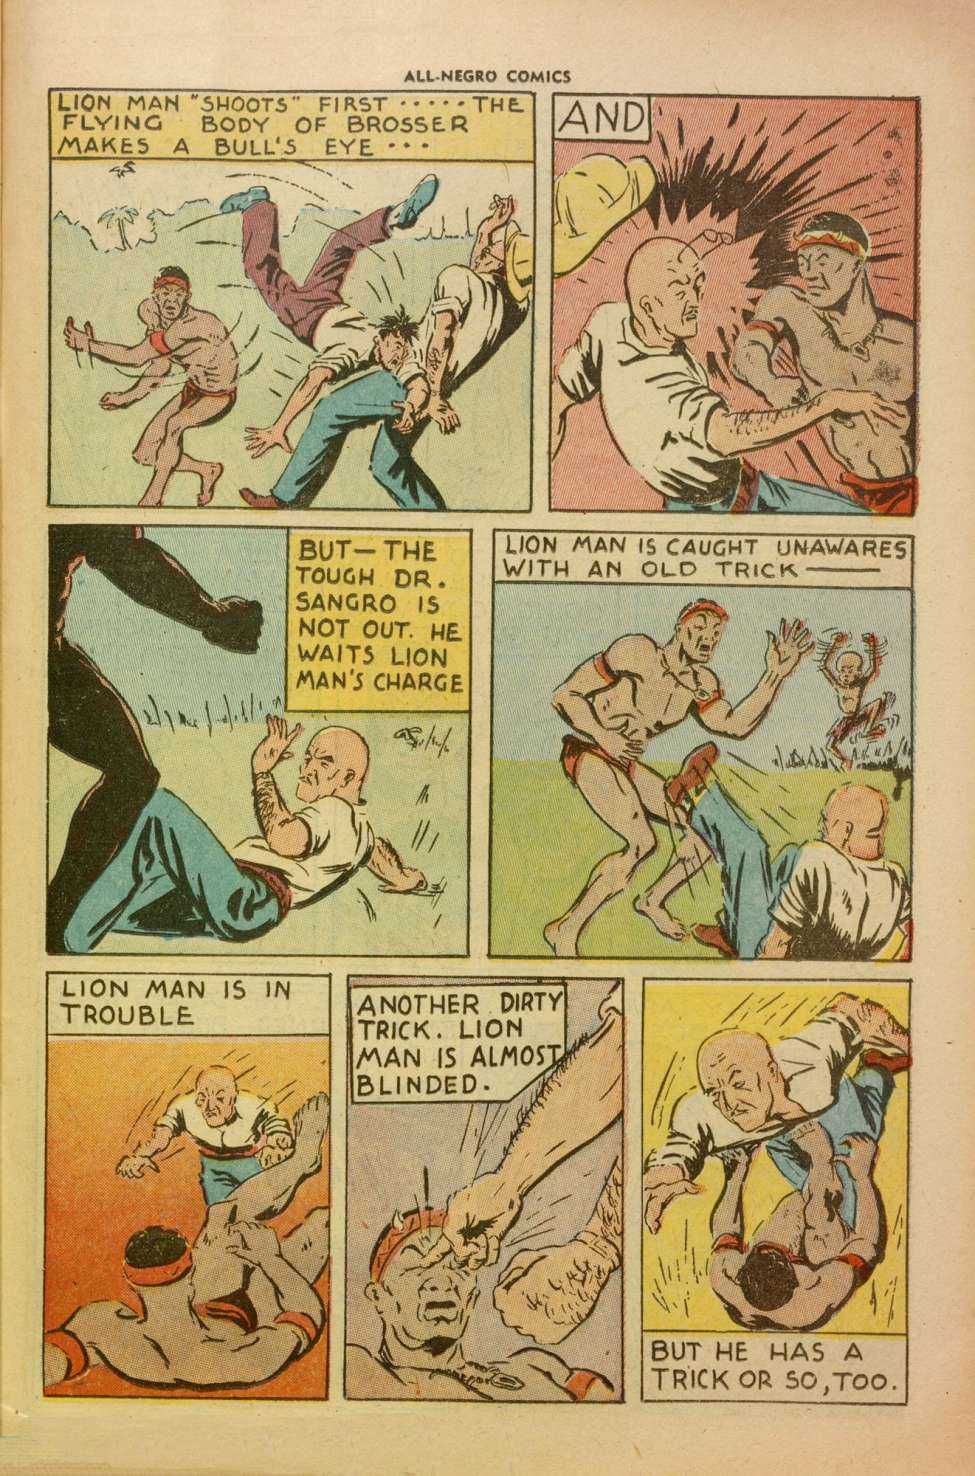 A page from The All-Negro Comics of Lion man fighting, and winning, against his opponent.